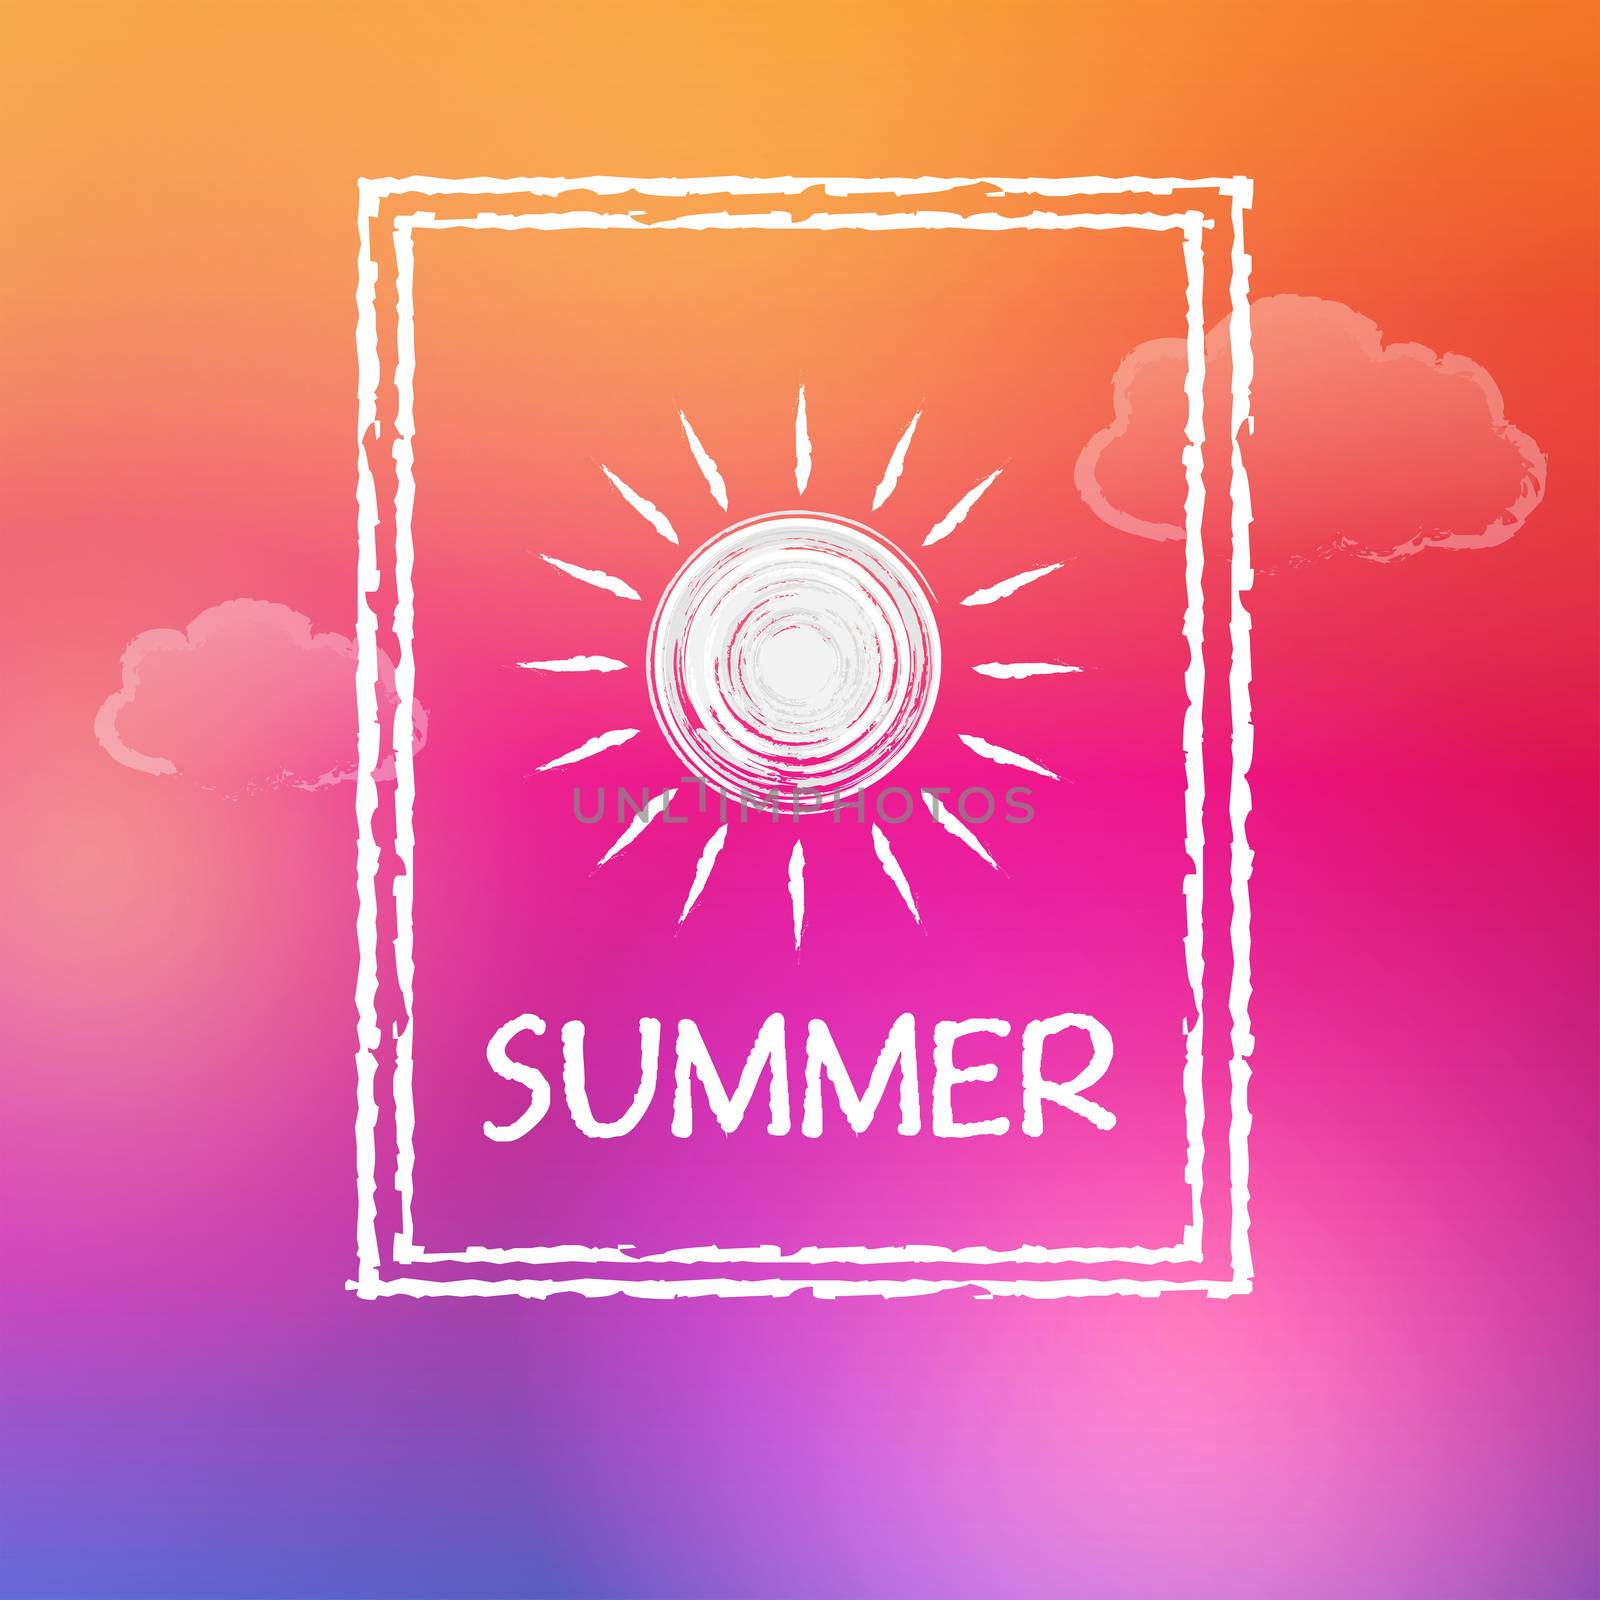 text summer with white sun and clouds in frame over orange pink sky background, flat design label